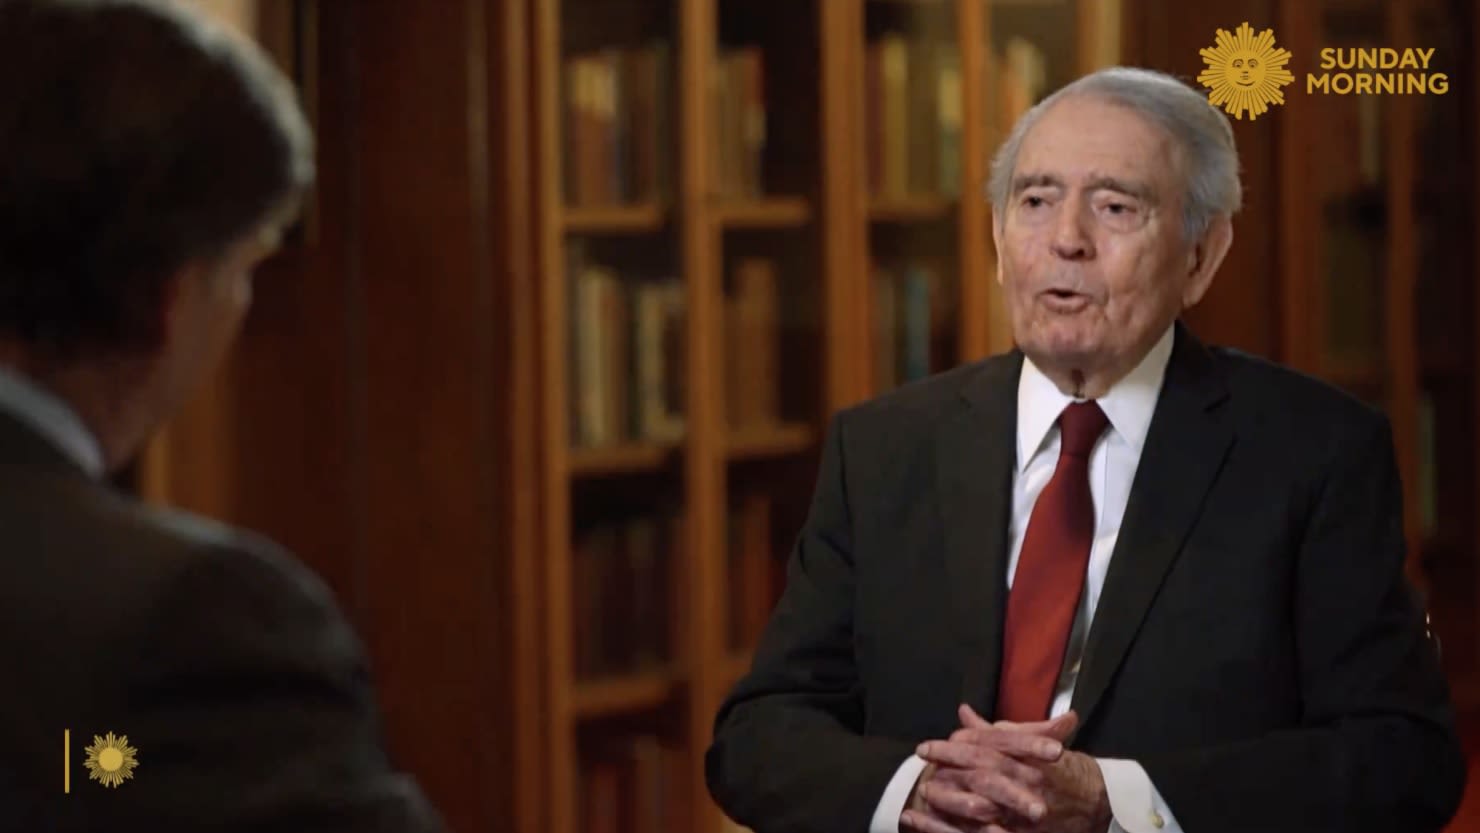 Dan Rather Returns to CBS News After Nearly Two Decades Away